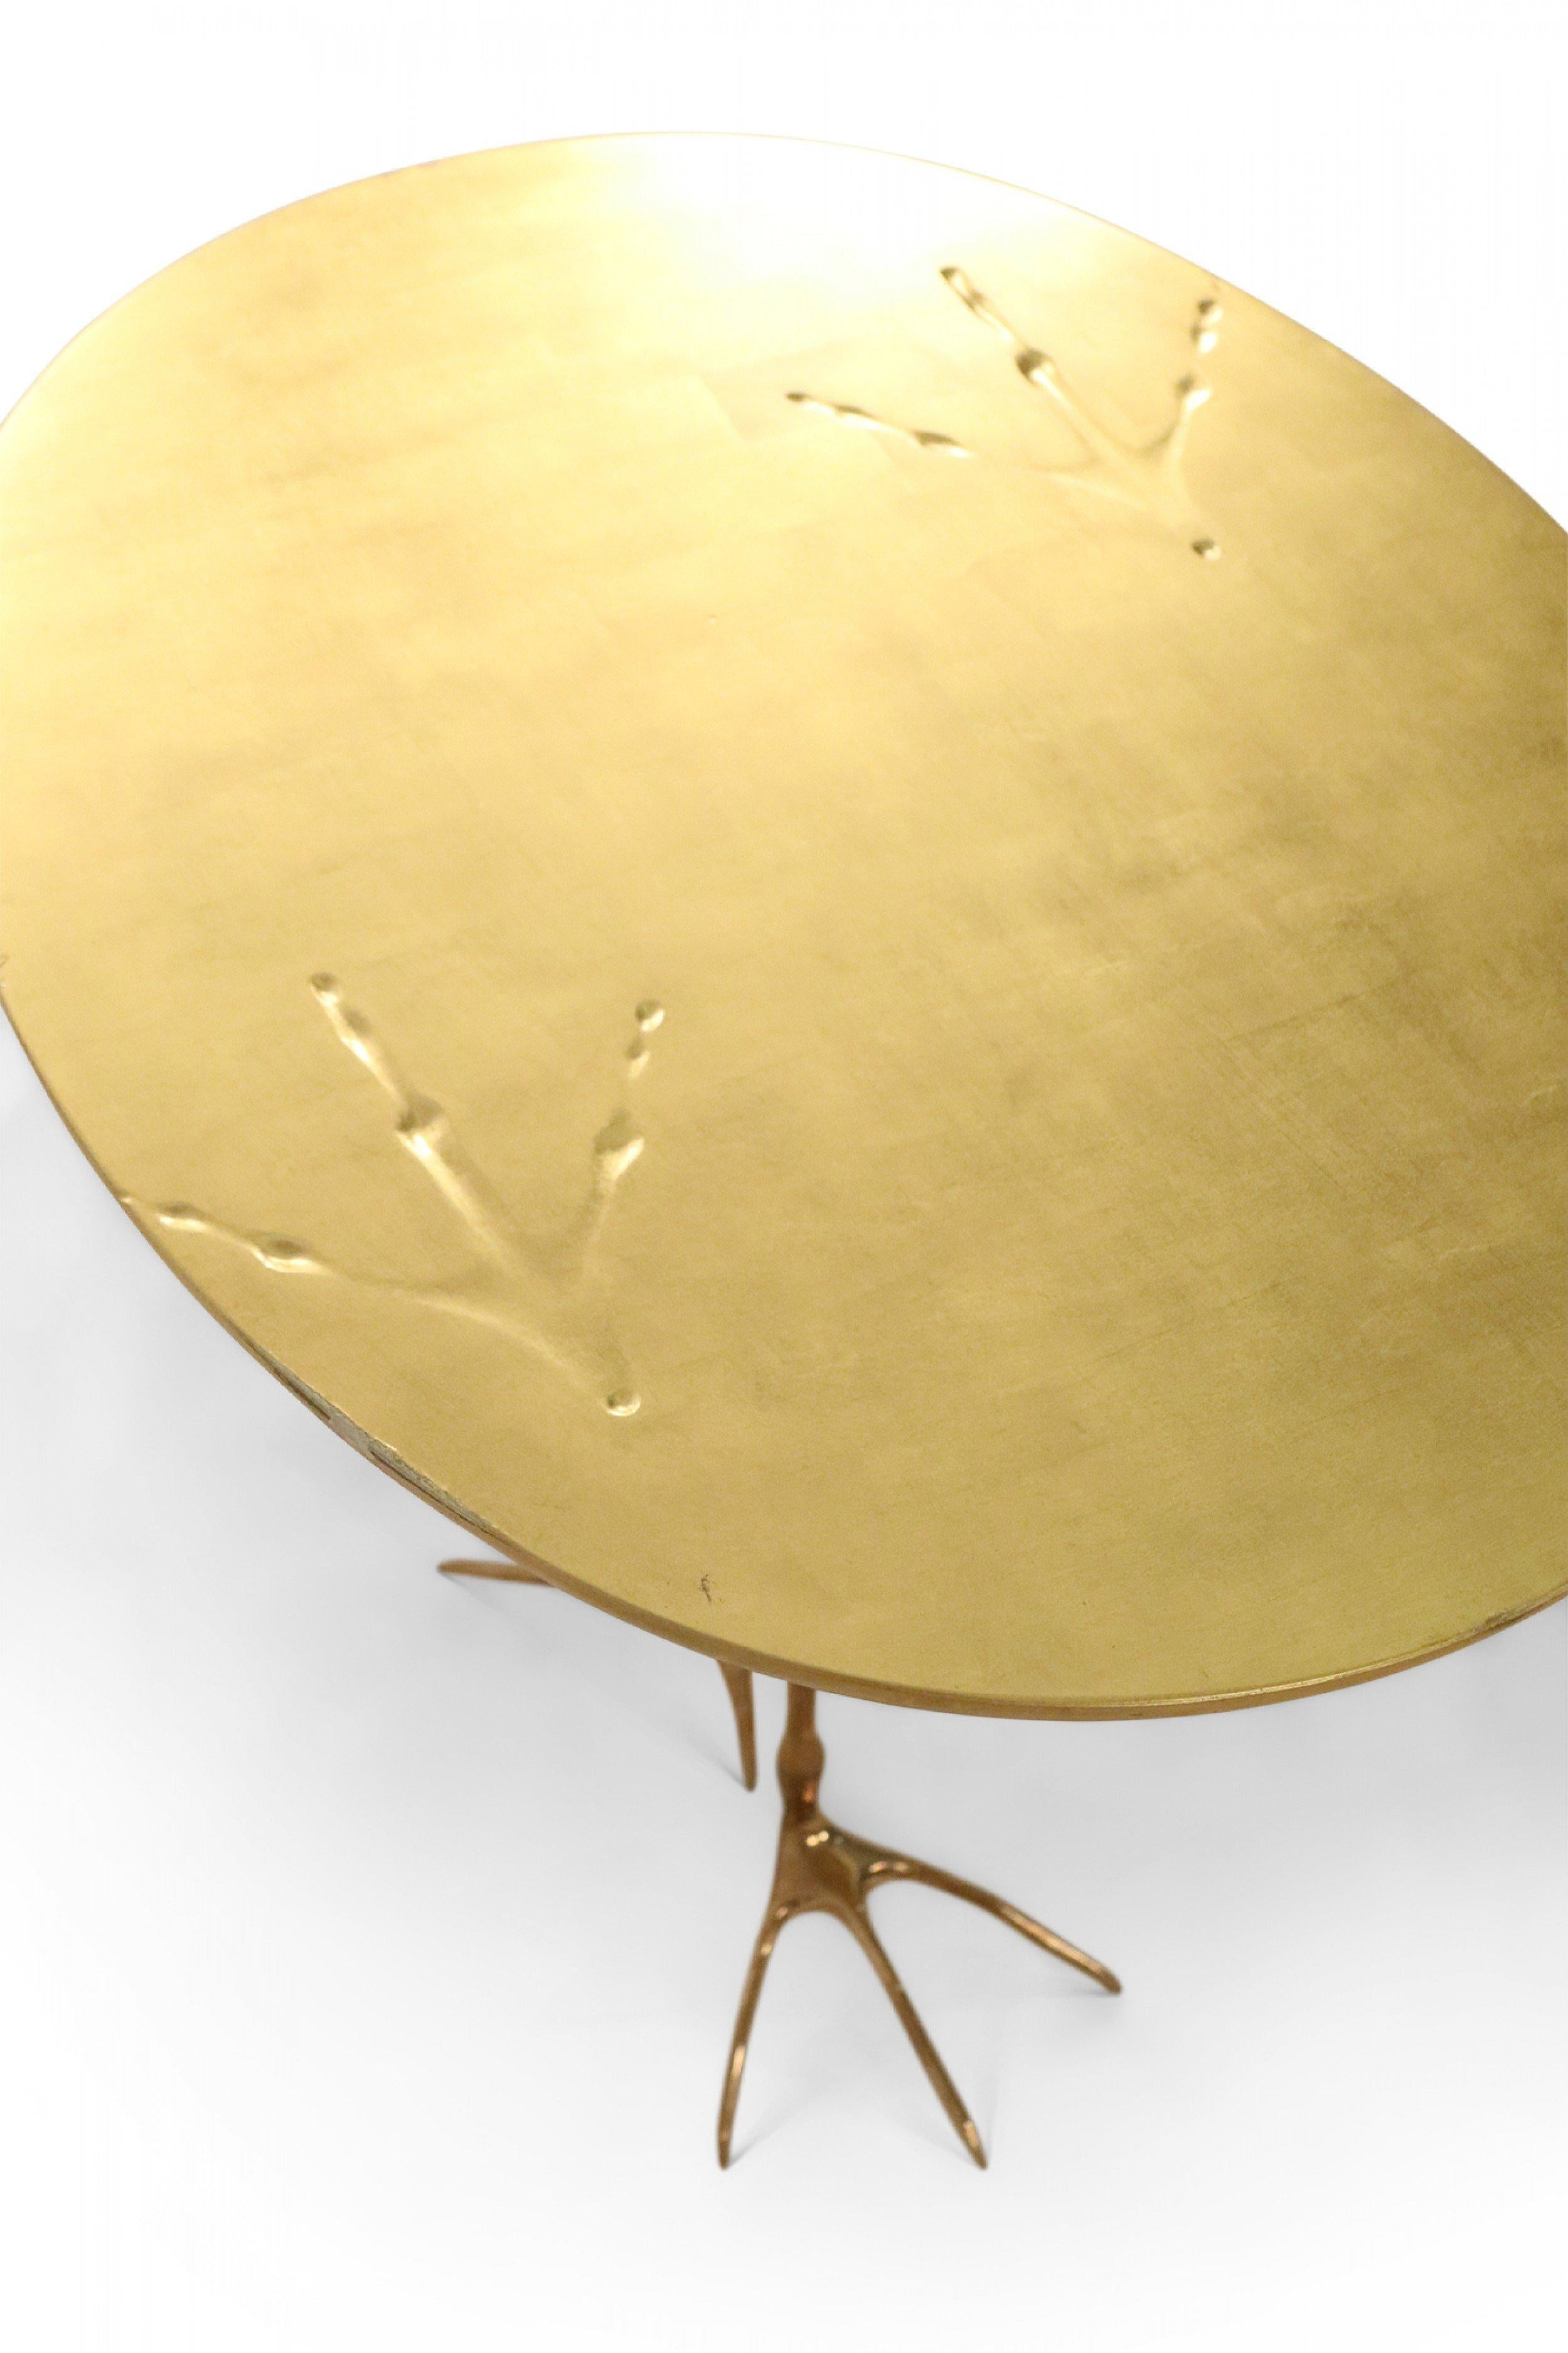 Meret Oppenheim Mid-Century Gilt Metal Bird Foot End Table For Sale 3